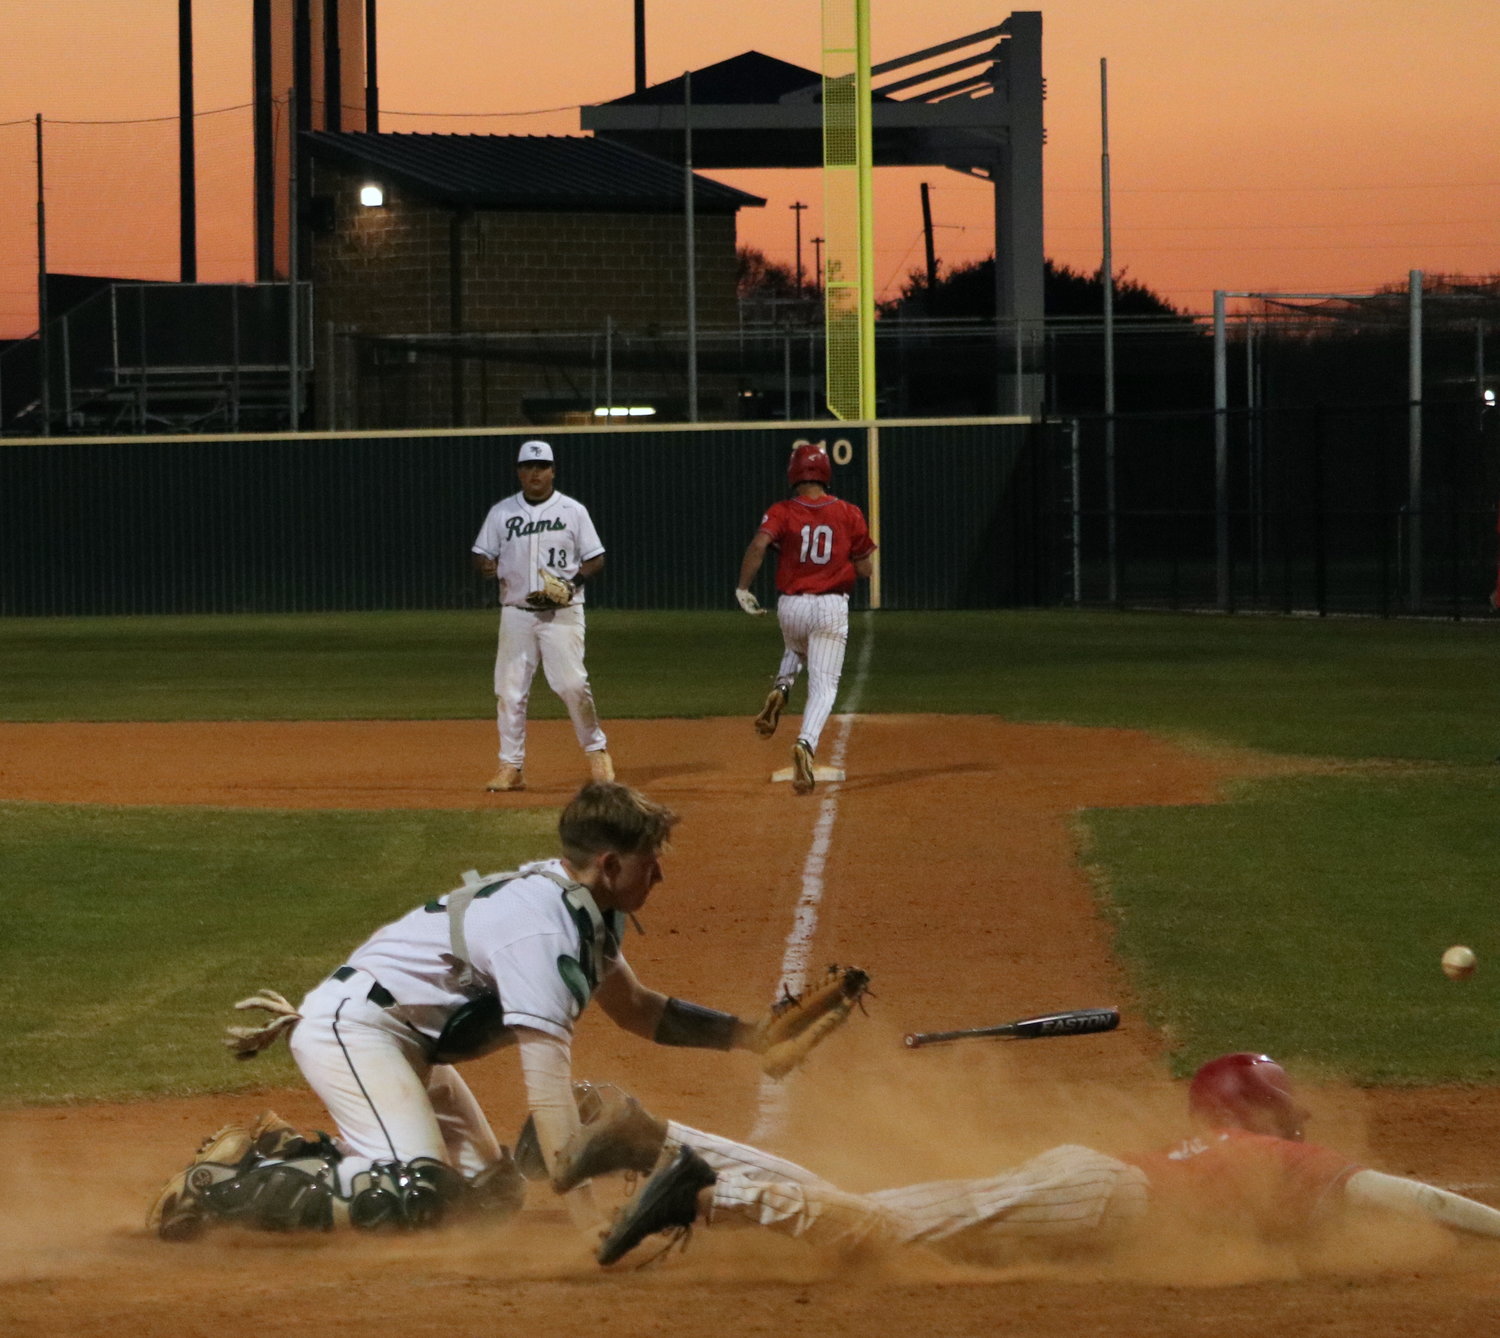 A ball gets away from Hayden Fullem as a Katy runner scores during Tuesday’s game between Katy and Mayde Creek at the Mayde Creek baseball field.